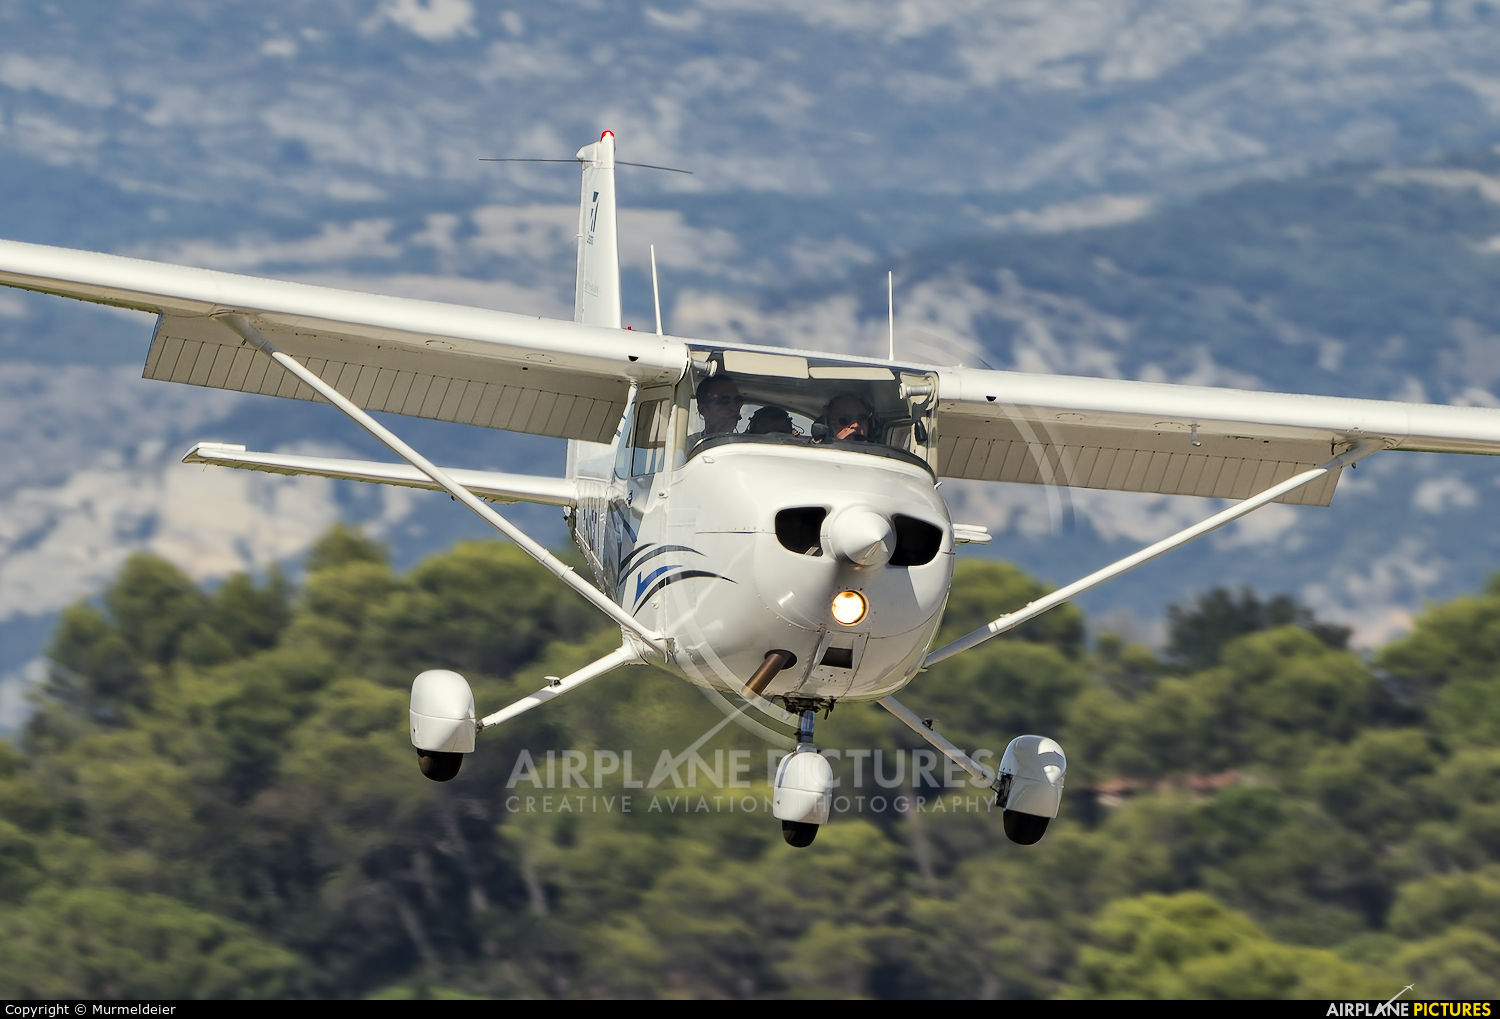 Private F-GBFT aircraft at Cannes - Mandelieu